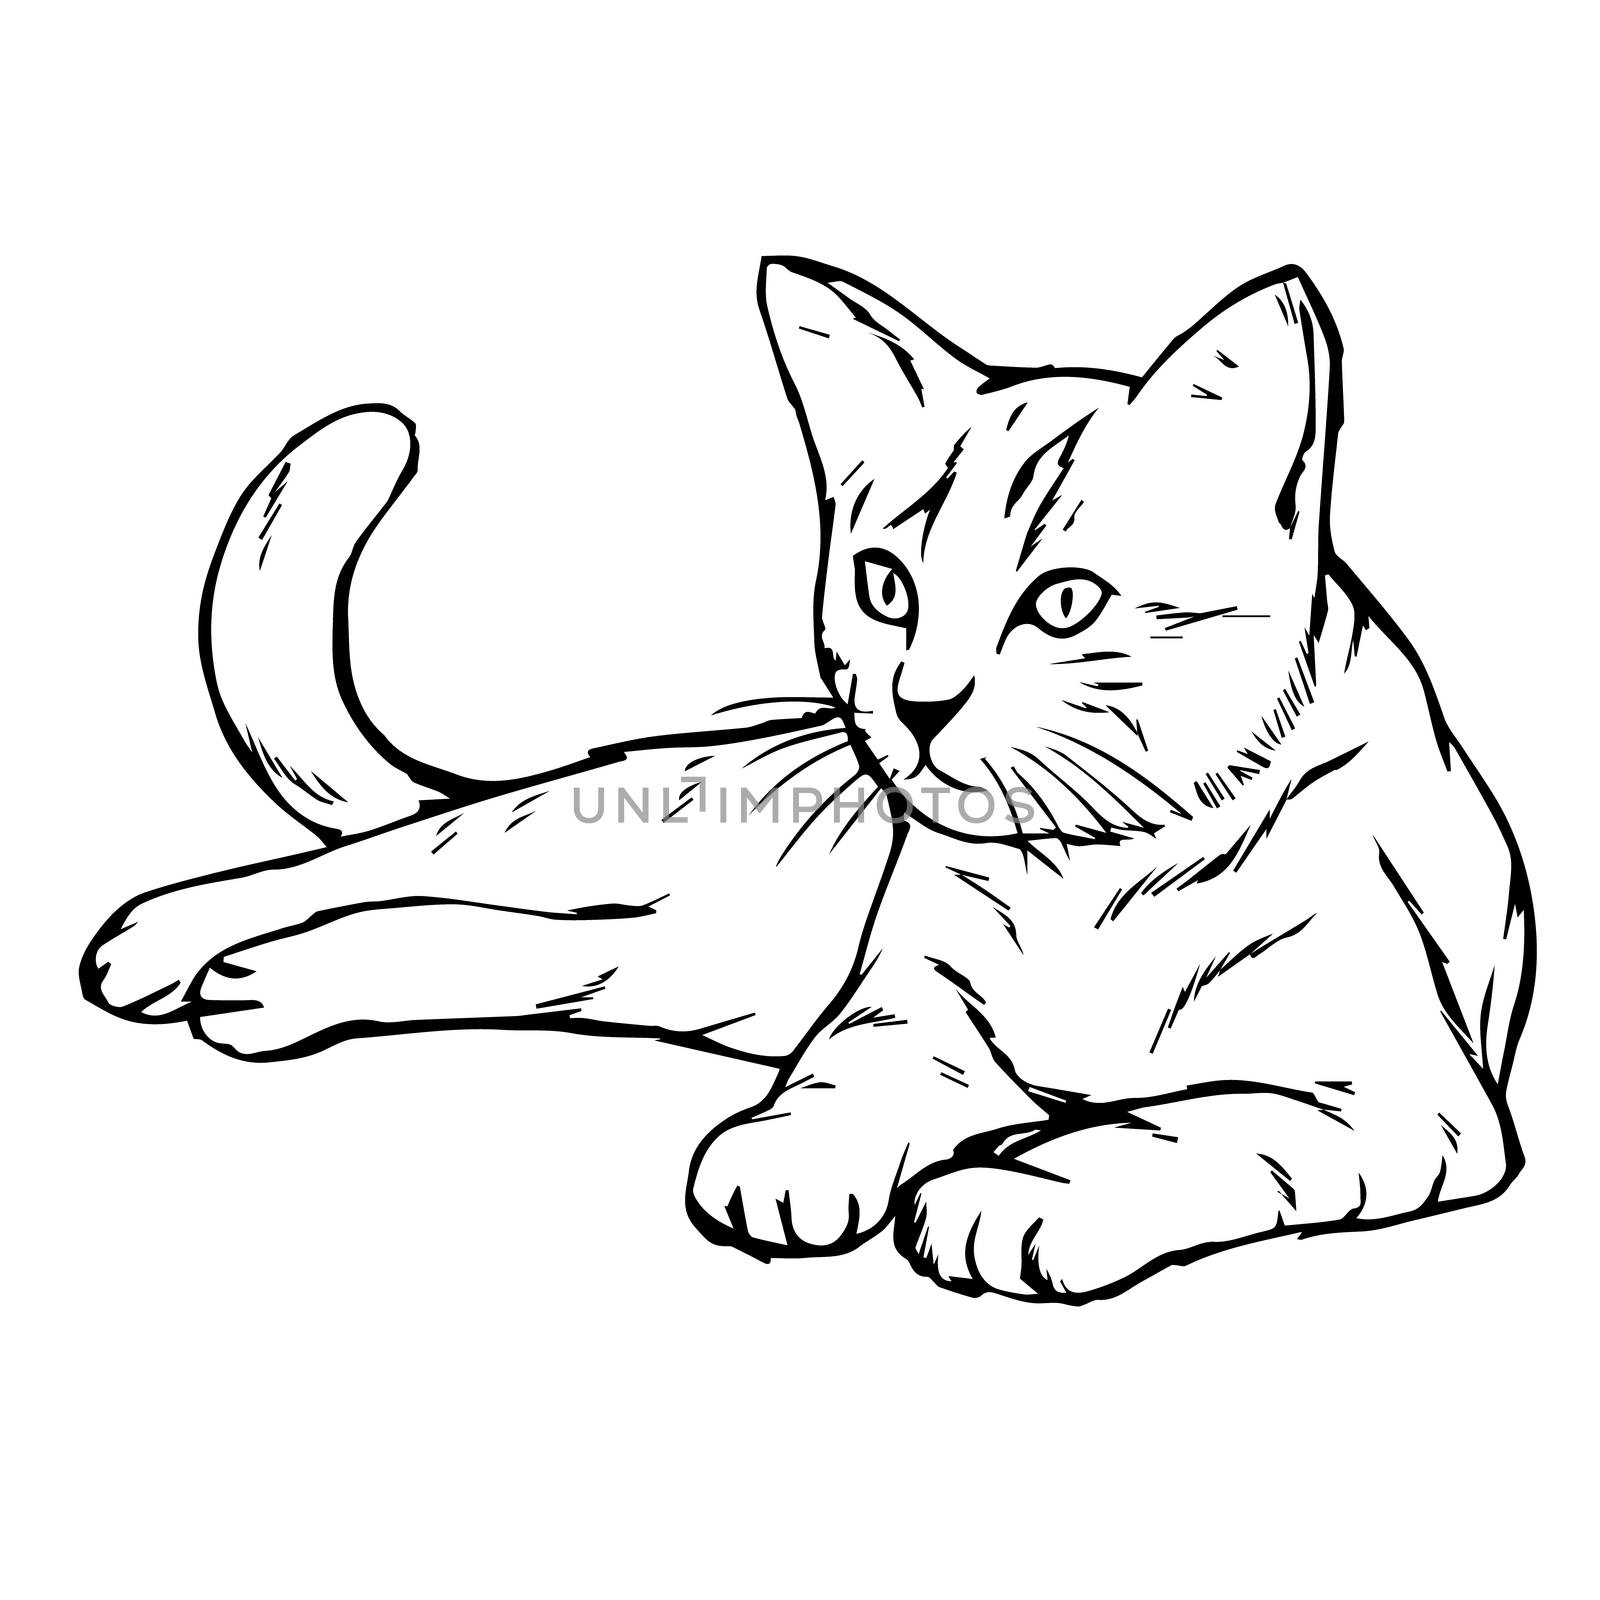 freehand sketch illustration of cat, kitten doodle hand drawn